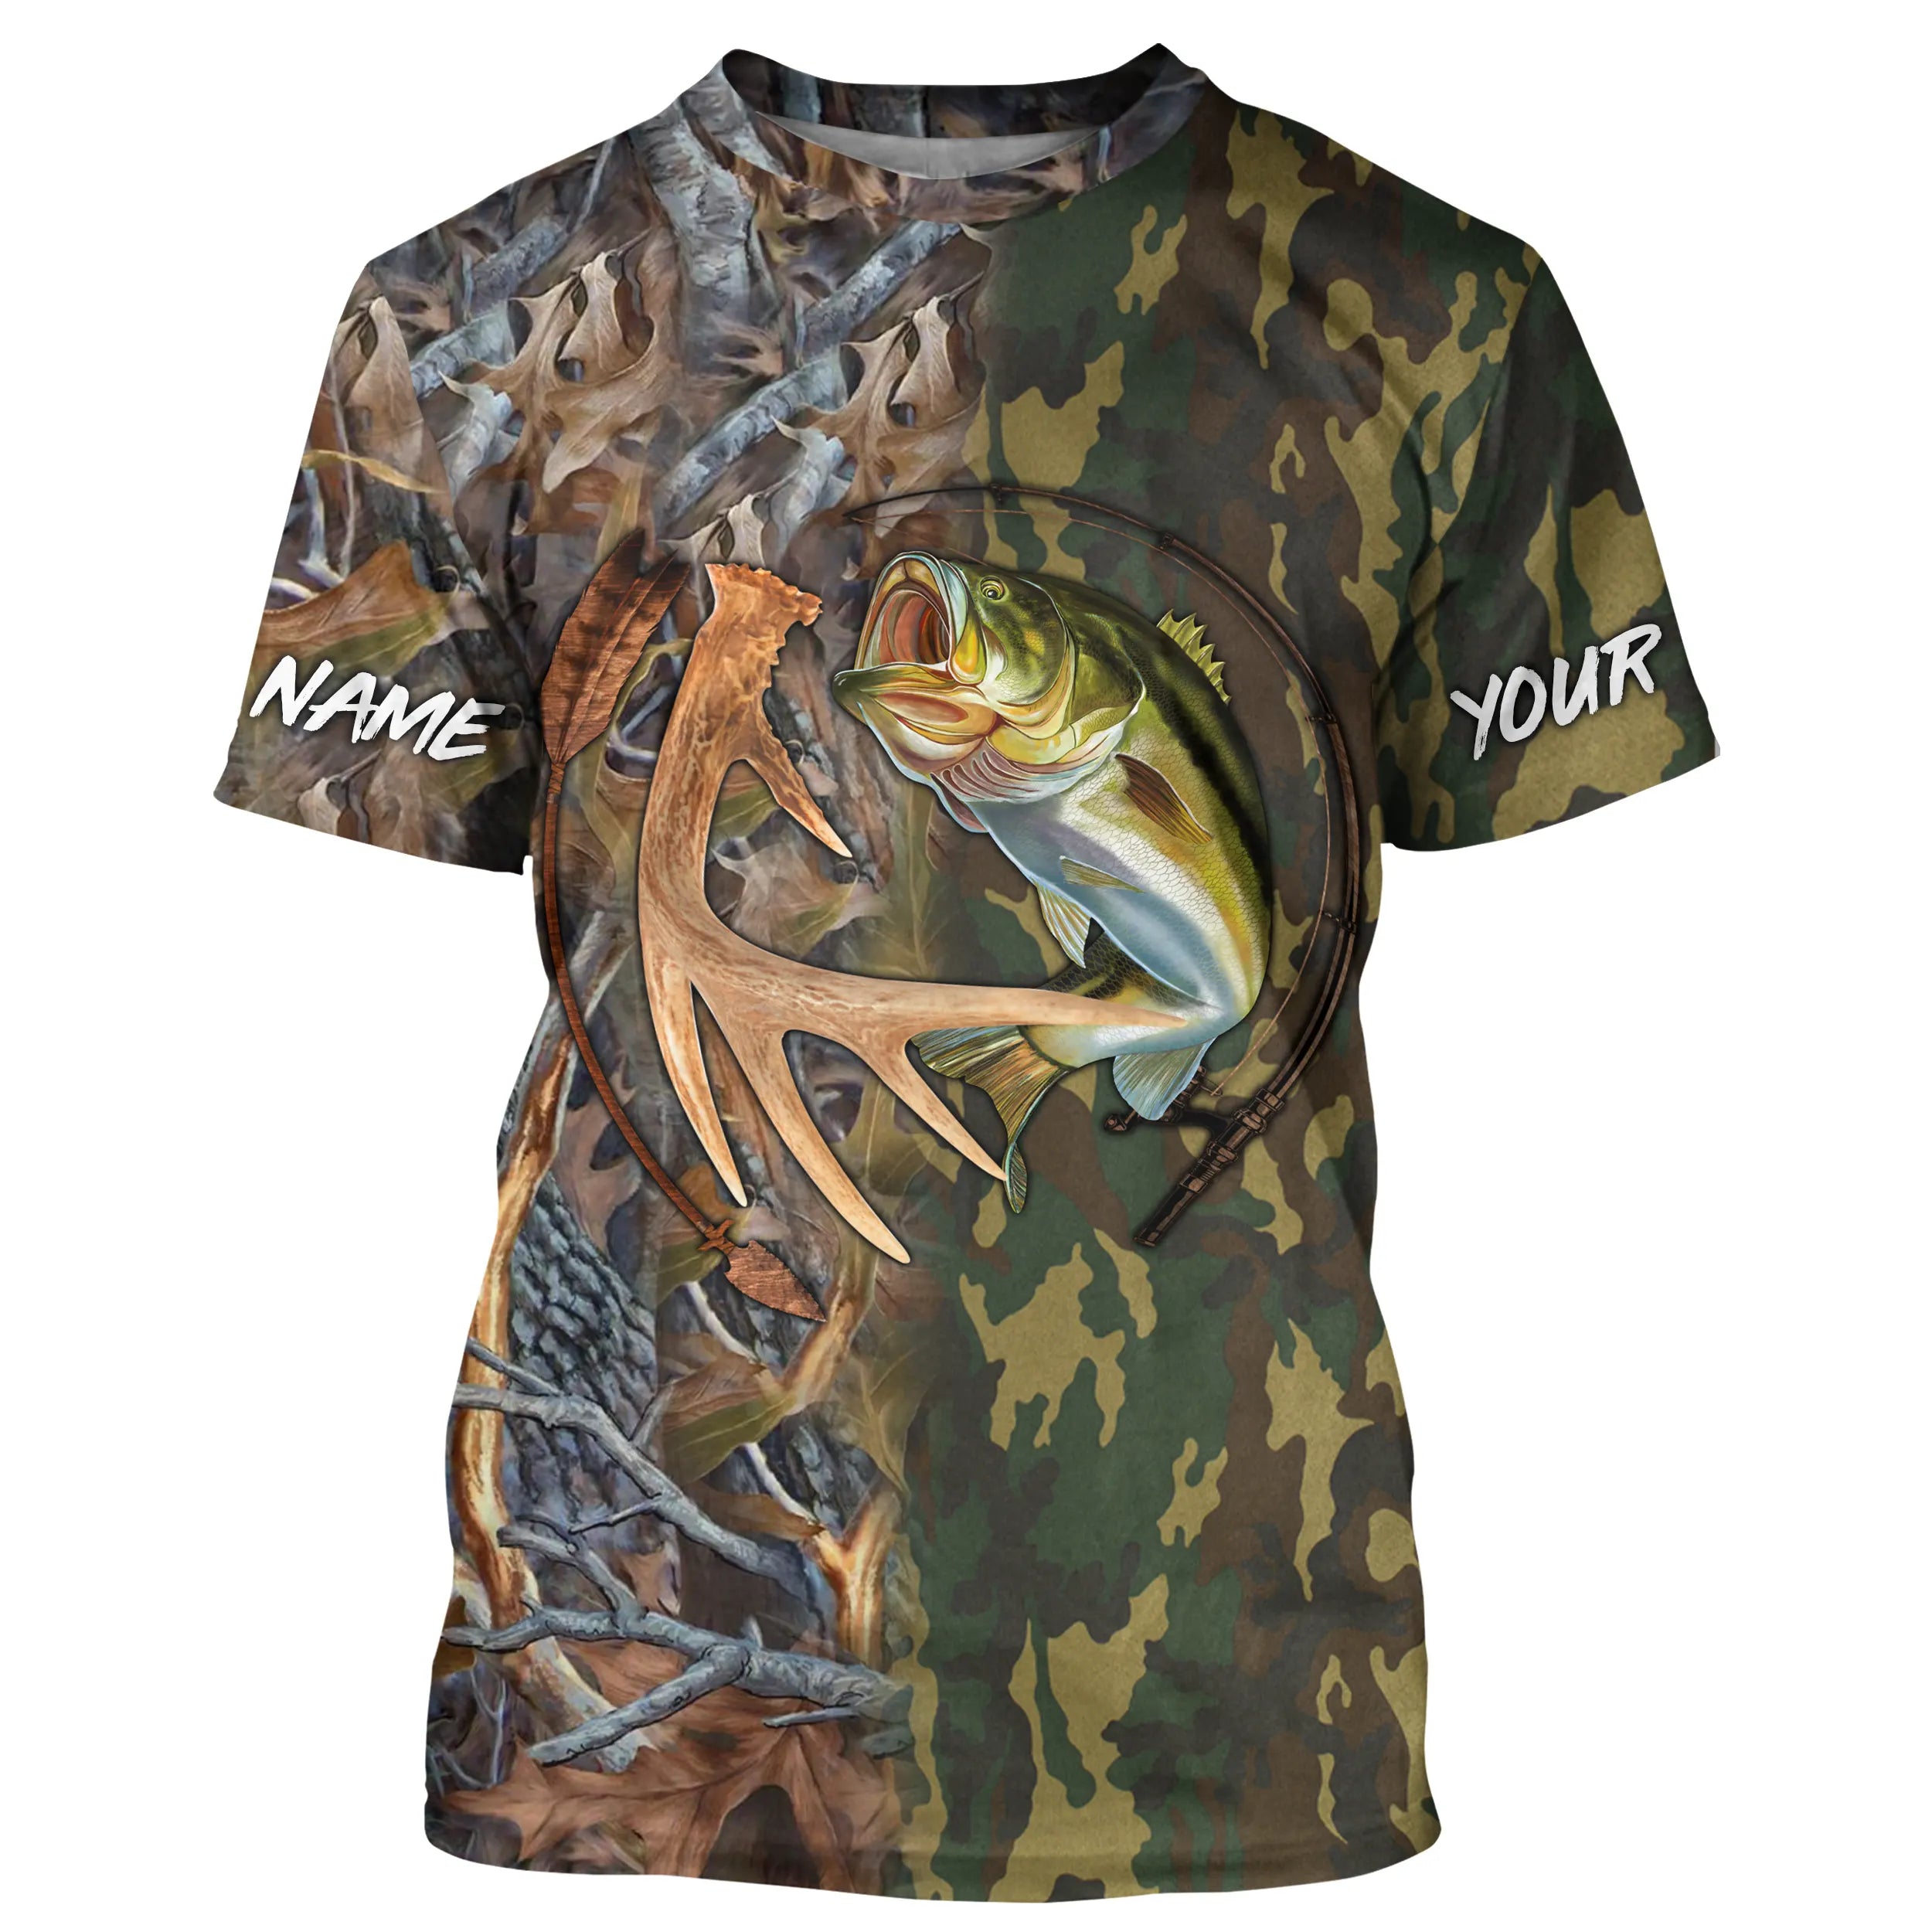 Deer and Bass Fishing and Hunting Camouflage UV Protection tournament shirts, Personalized gifts FSD3194